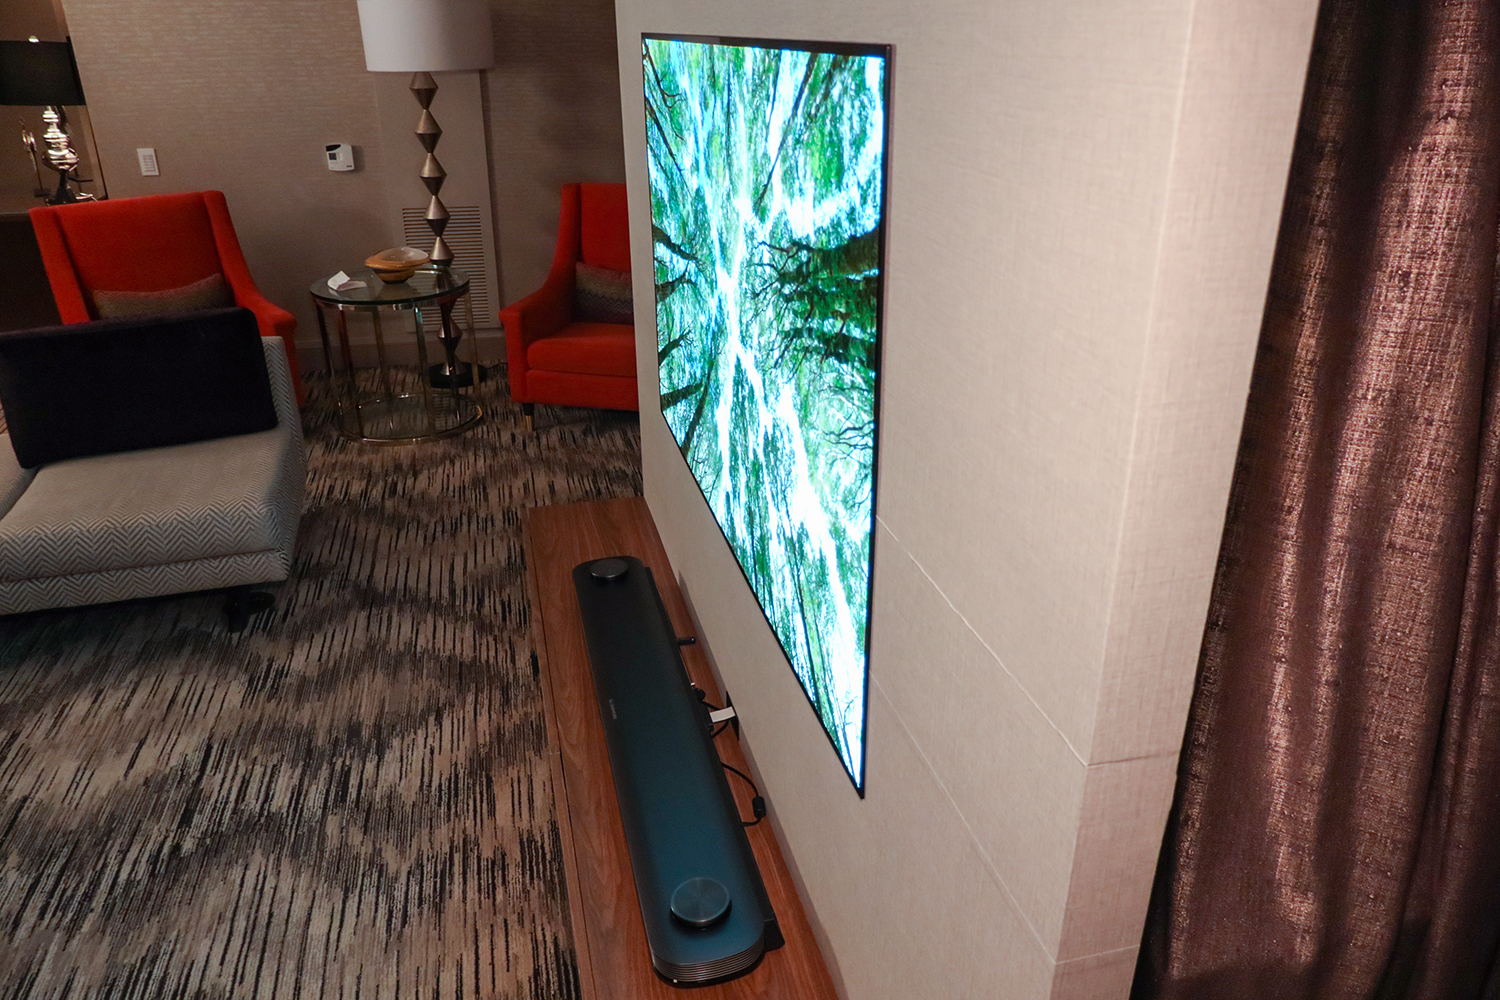 LG W- Series Wallpaper OLED and Atmos Soundbar - Hands on at CES 2017 -  YouTube